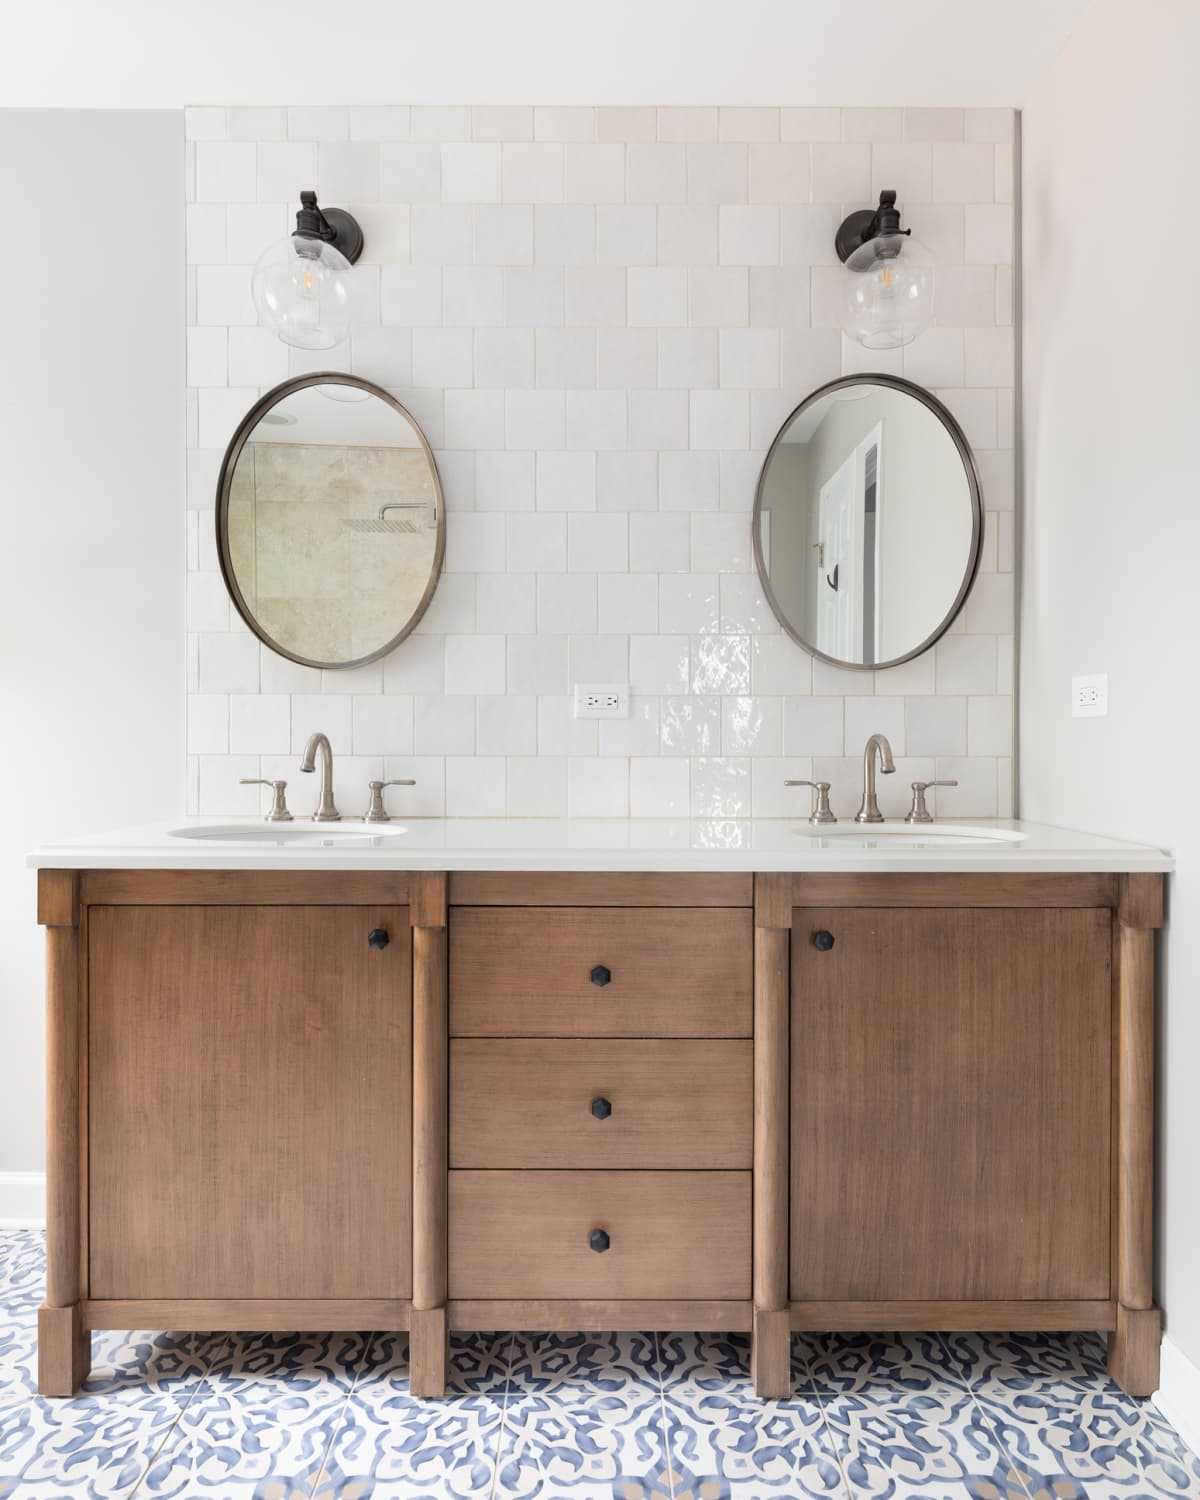 Bathroom sinks with tile wall and mirrors